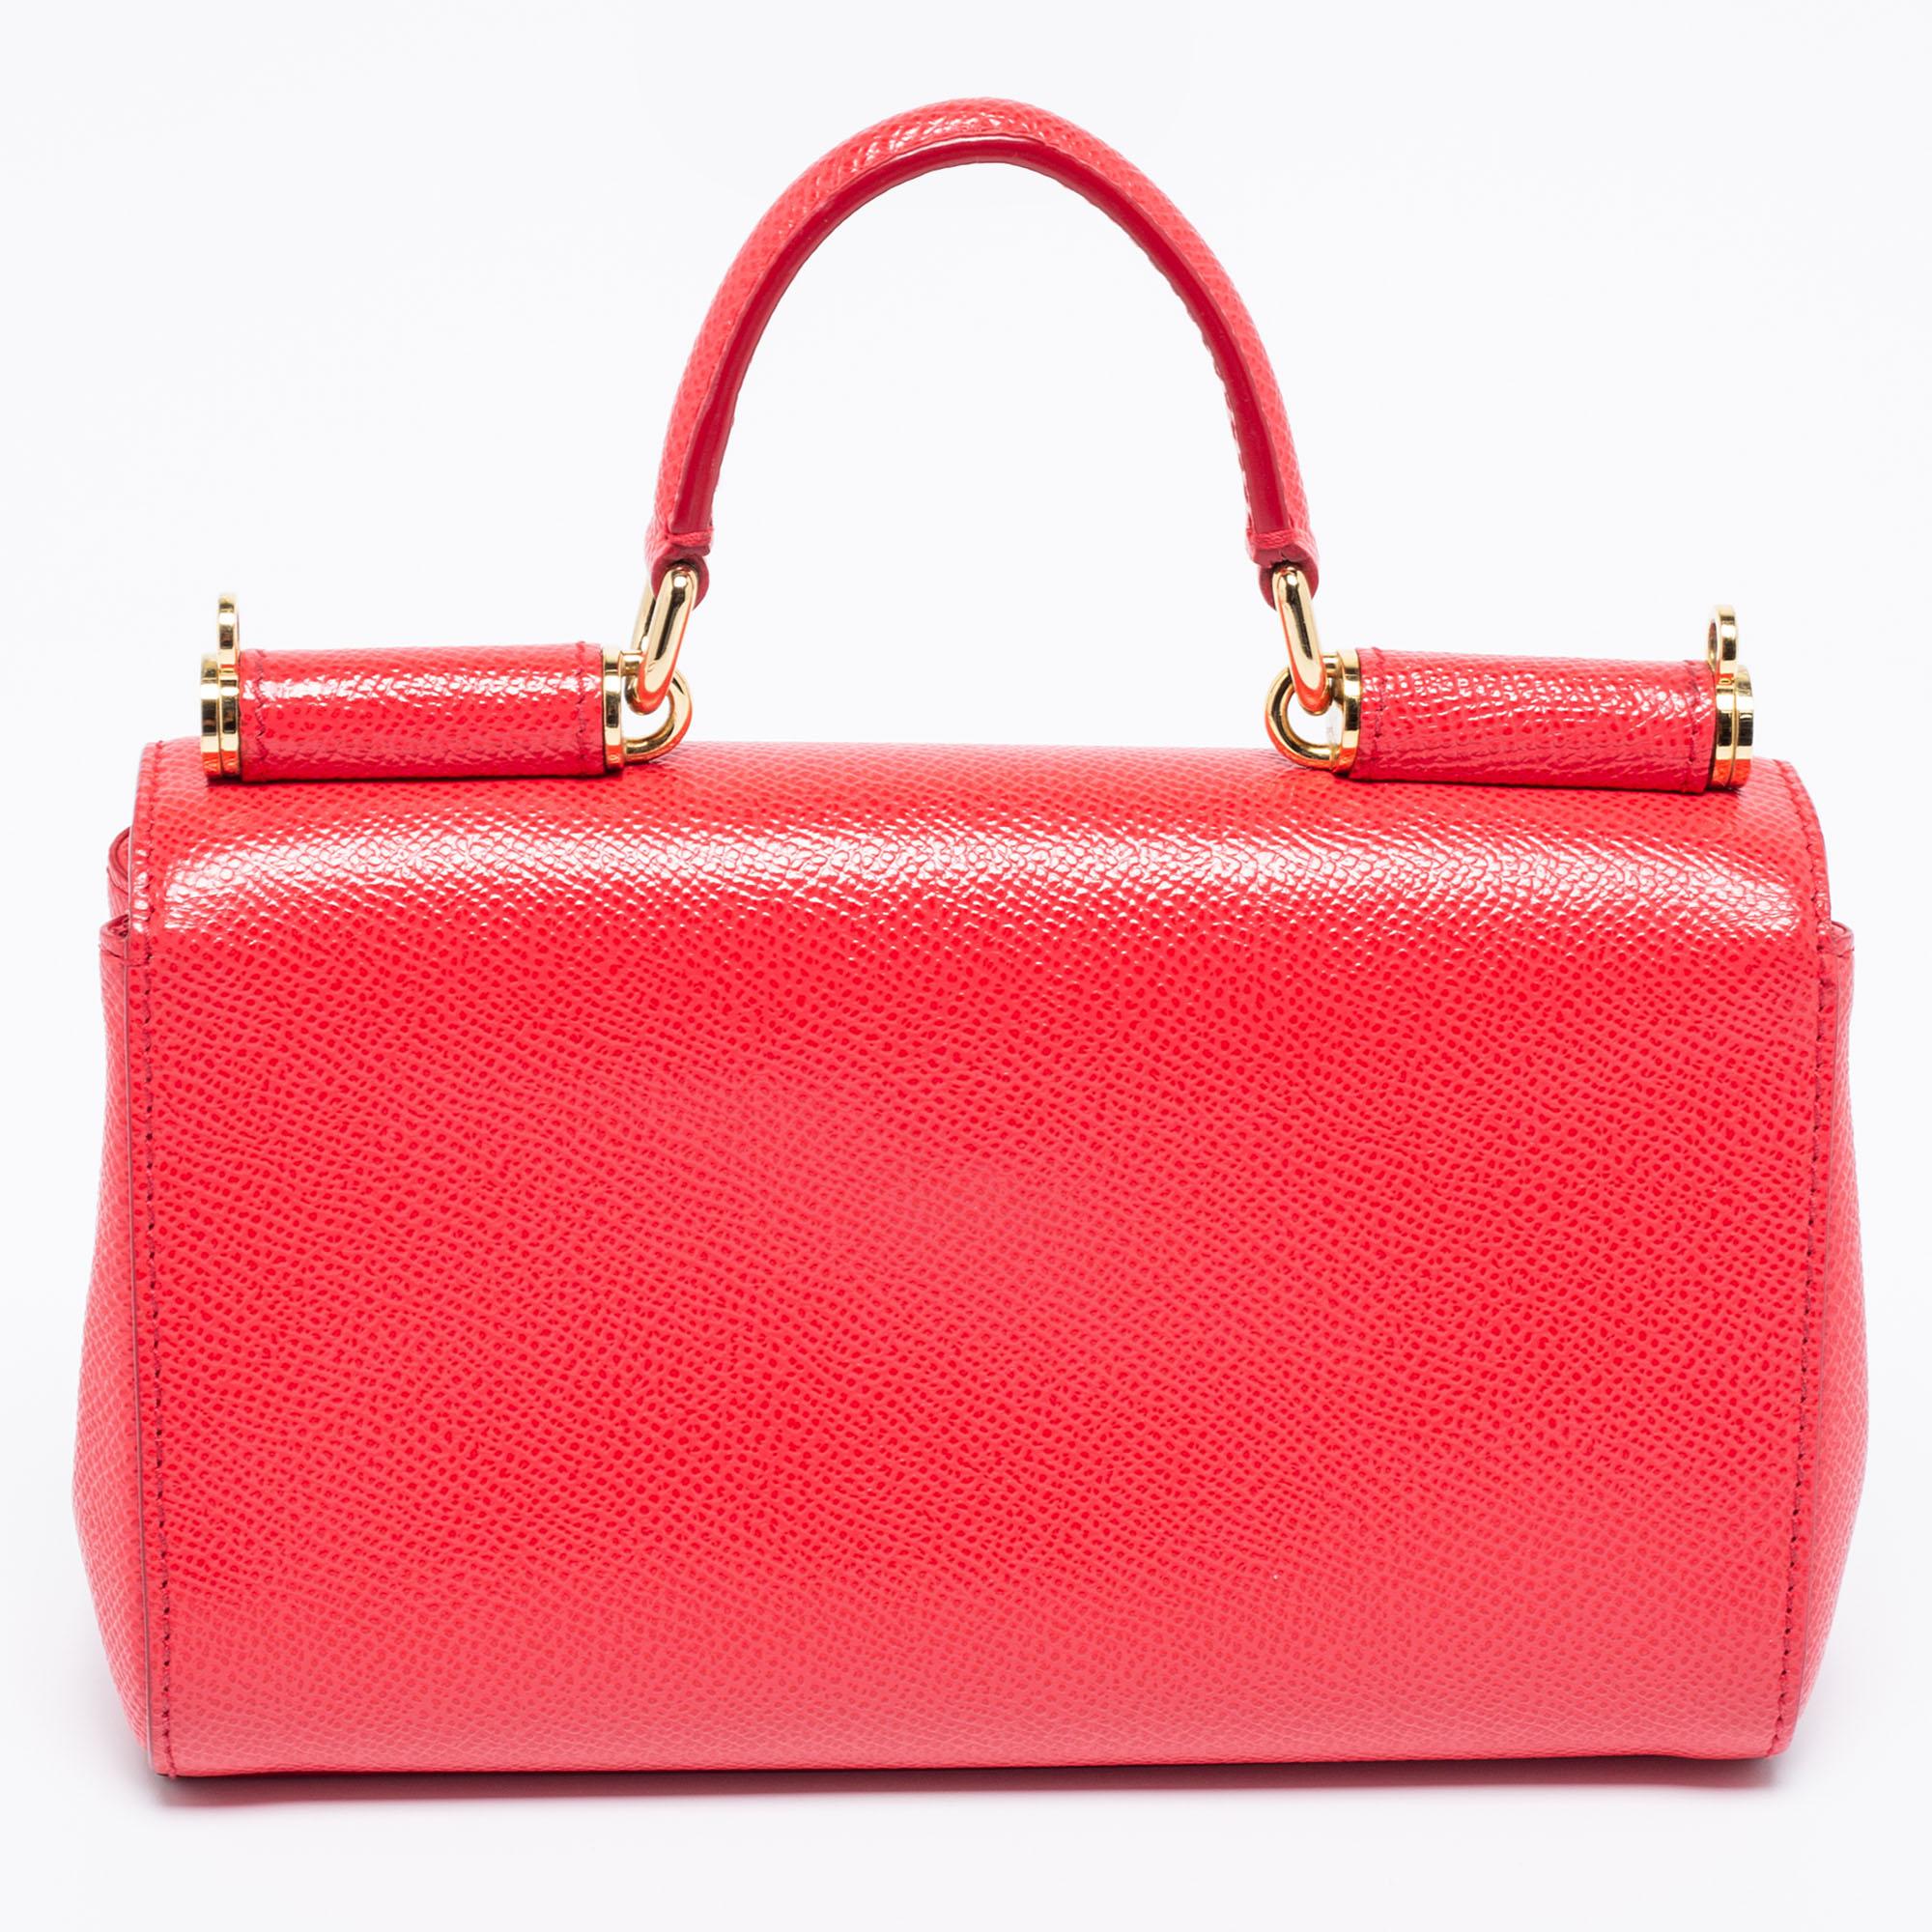 Designed from high-quality leather, this bag has style and durability. A spacious interior lined with fabric promises enough space for your belongings. The Dolce & Gabbana bag in coral pink has a crossbody strap, a top handle, and a front flap. Add